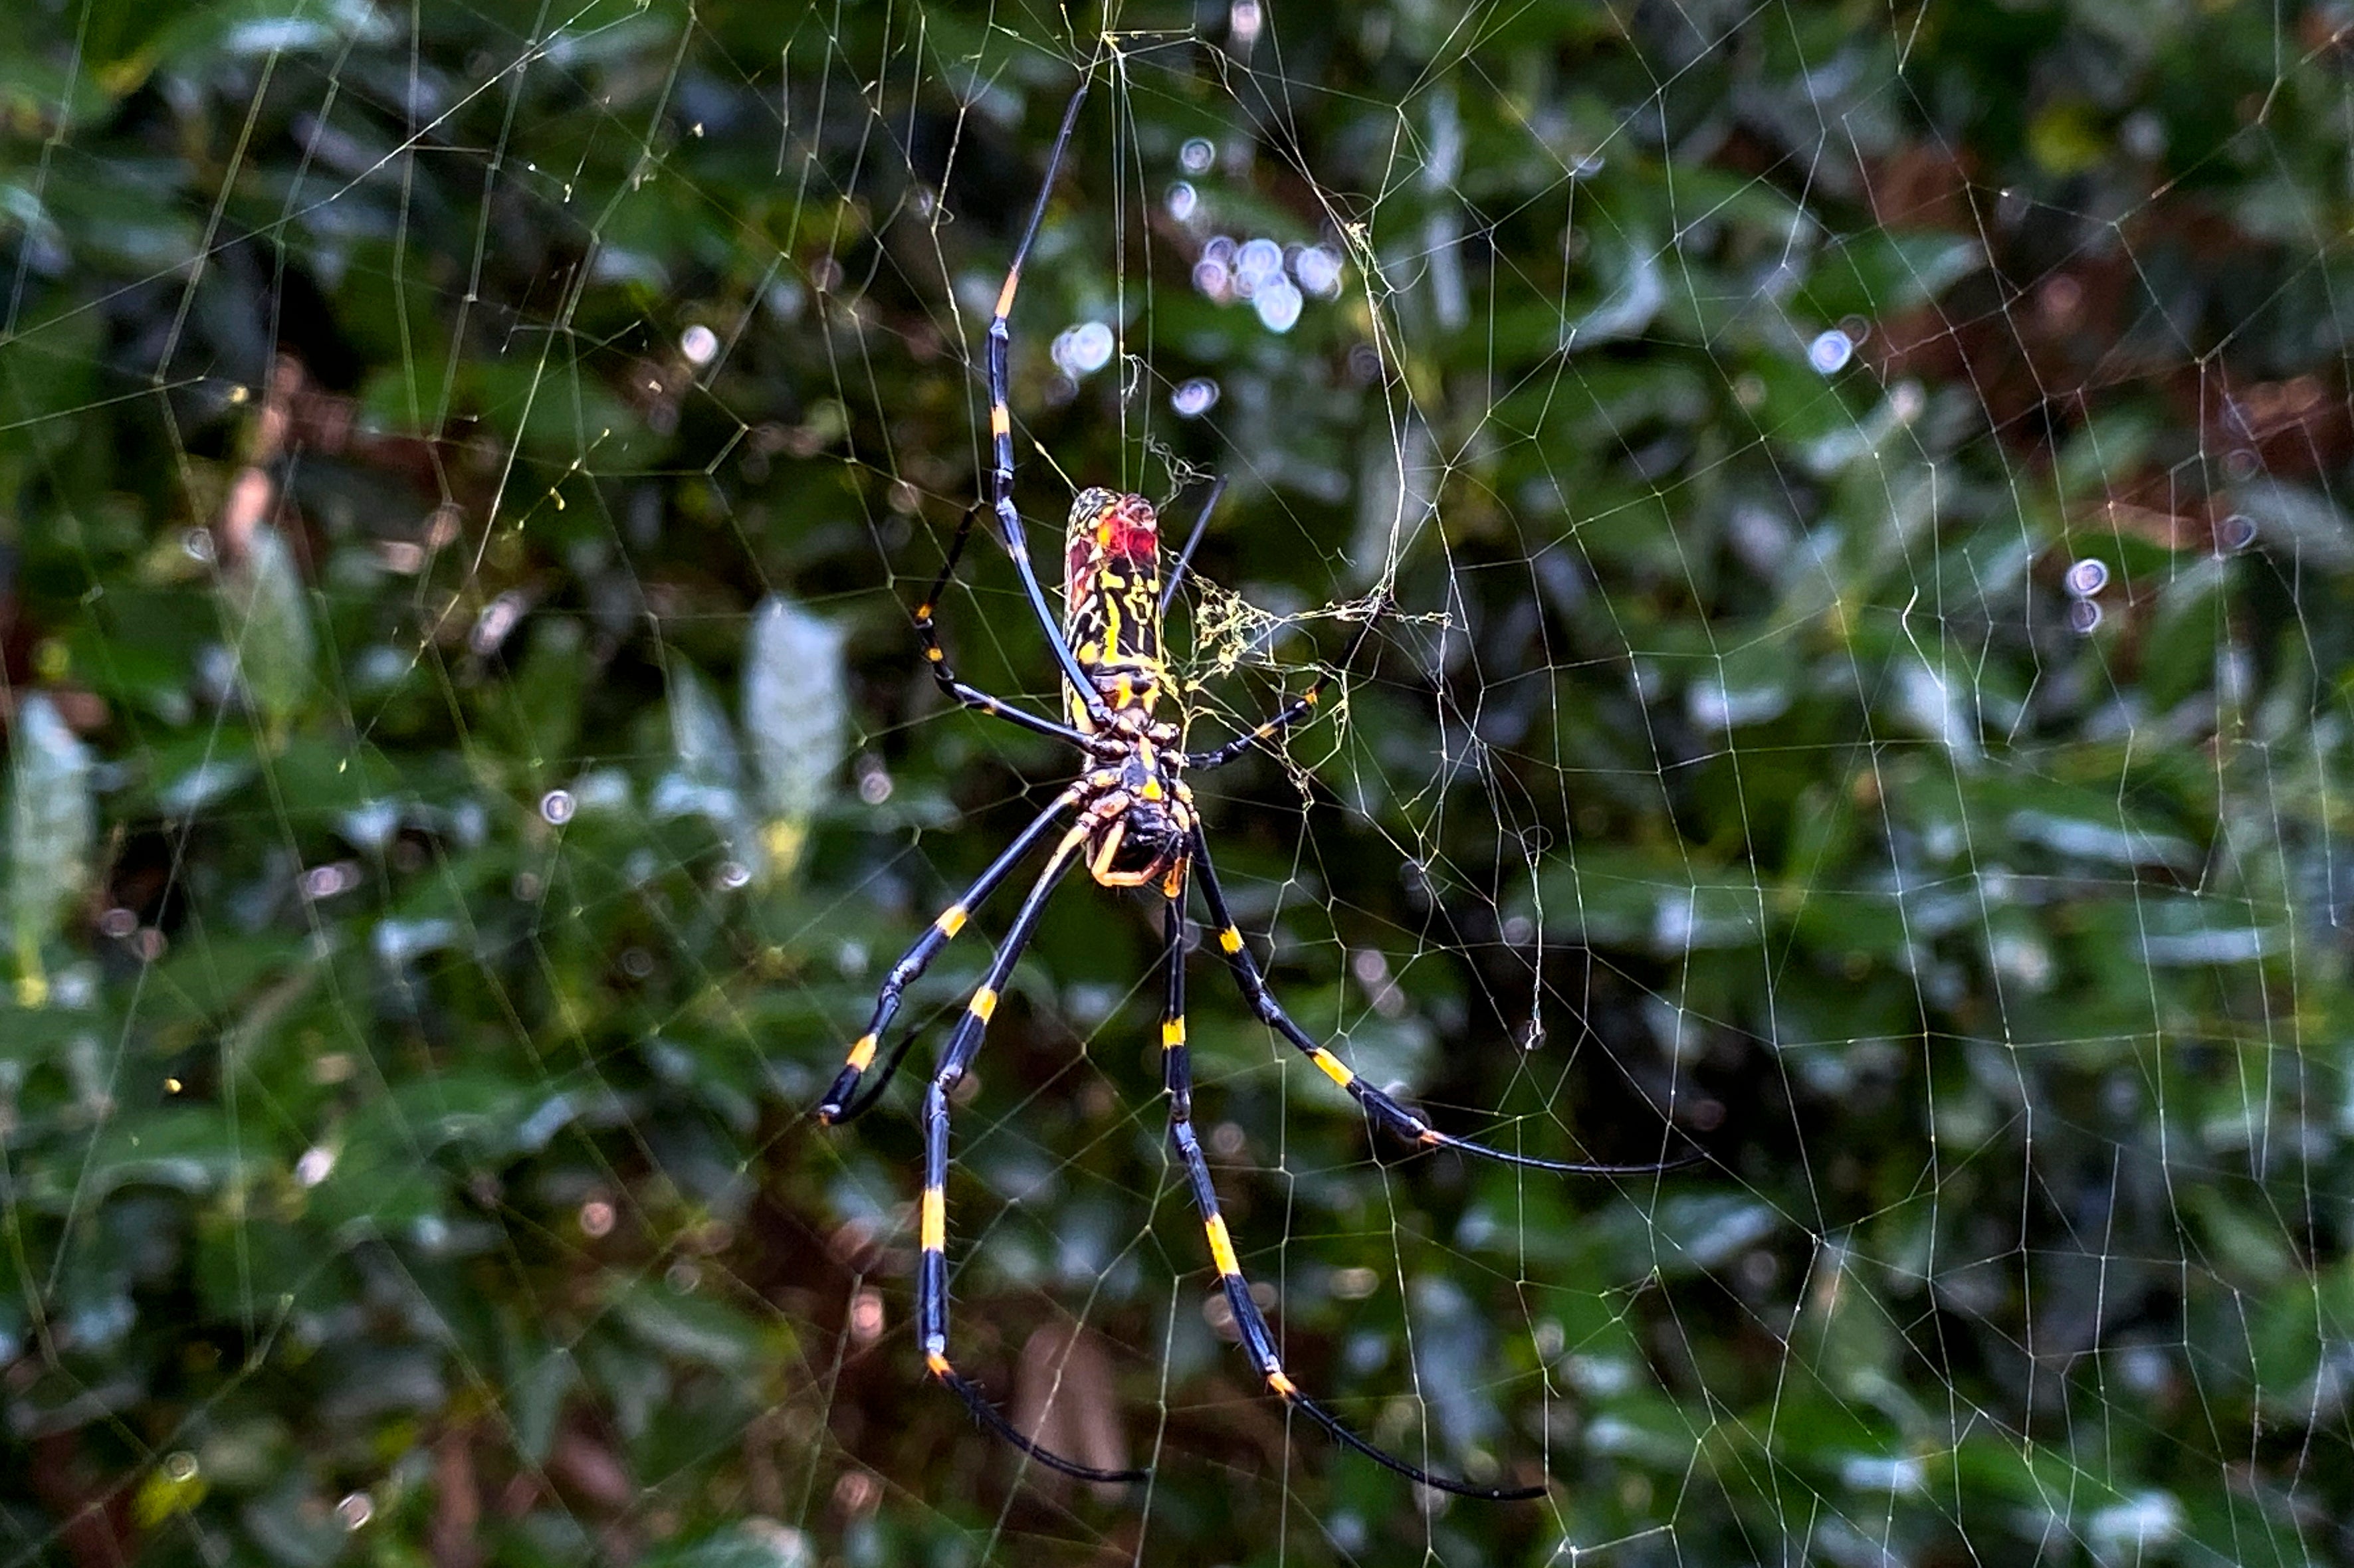 The Joro spider, a large spider native to East Asia, is seen in Johns Creek, Ga., on Sunday, Oct. 24, 2021.